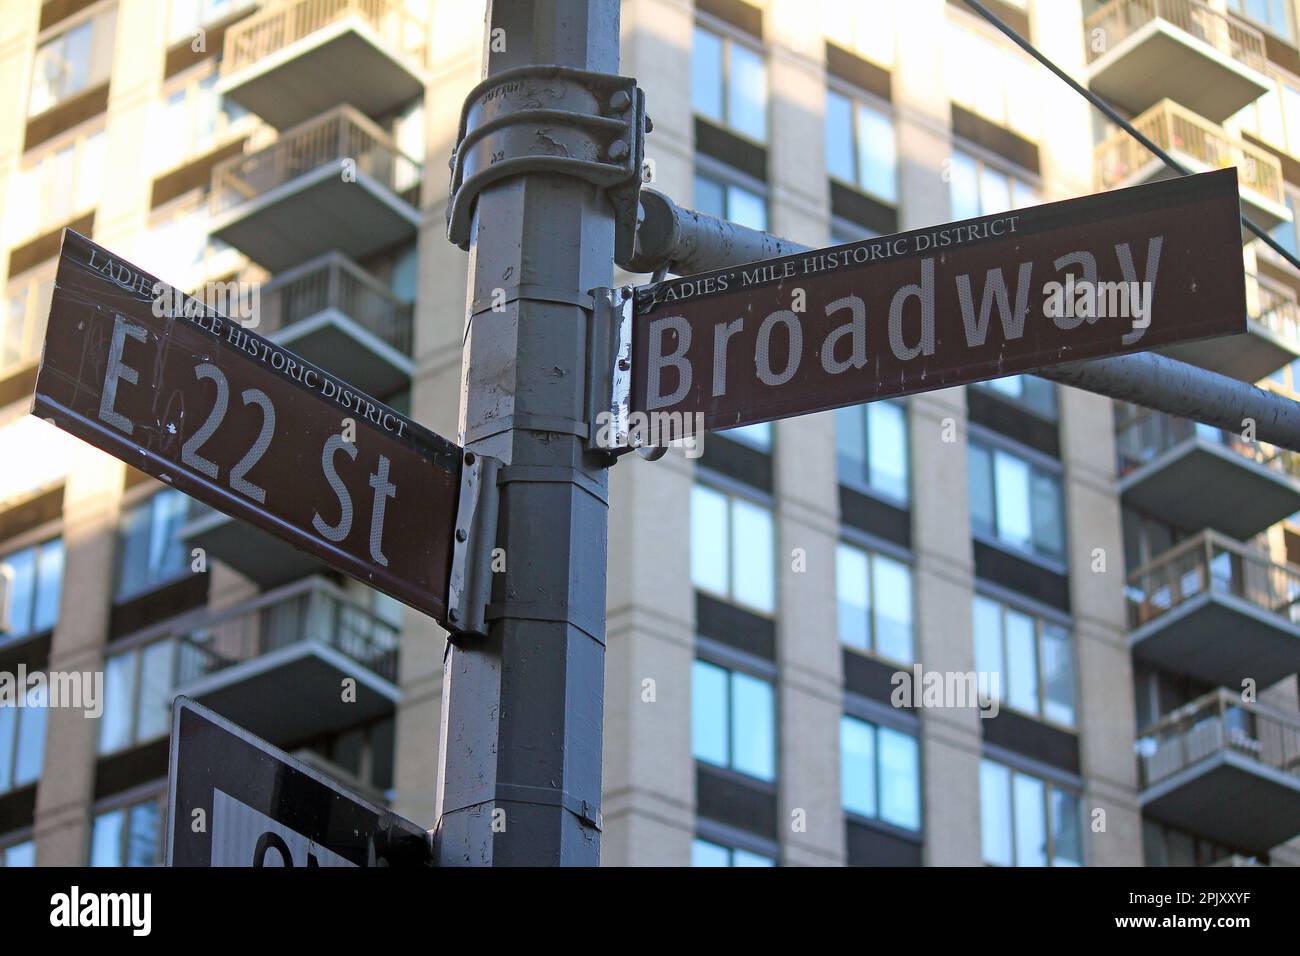 Brown East 22nd Street and Broadway historic sign in Midtown Manhattan in New York City Stock Photo